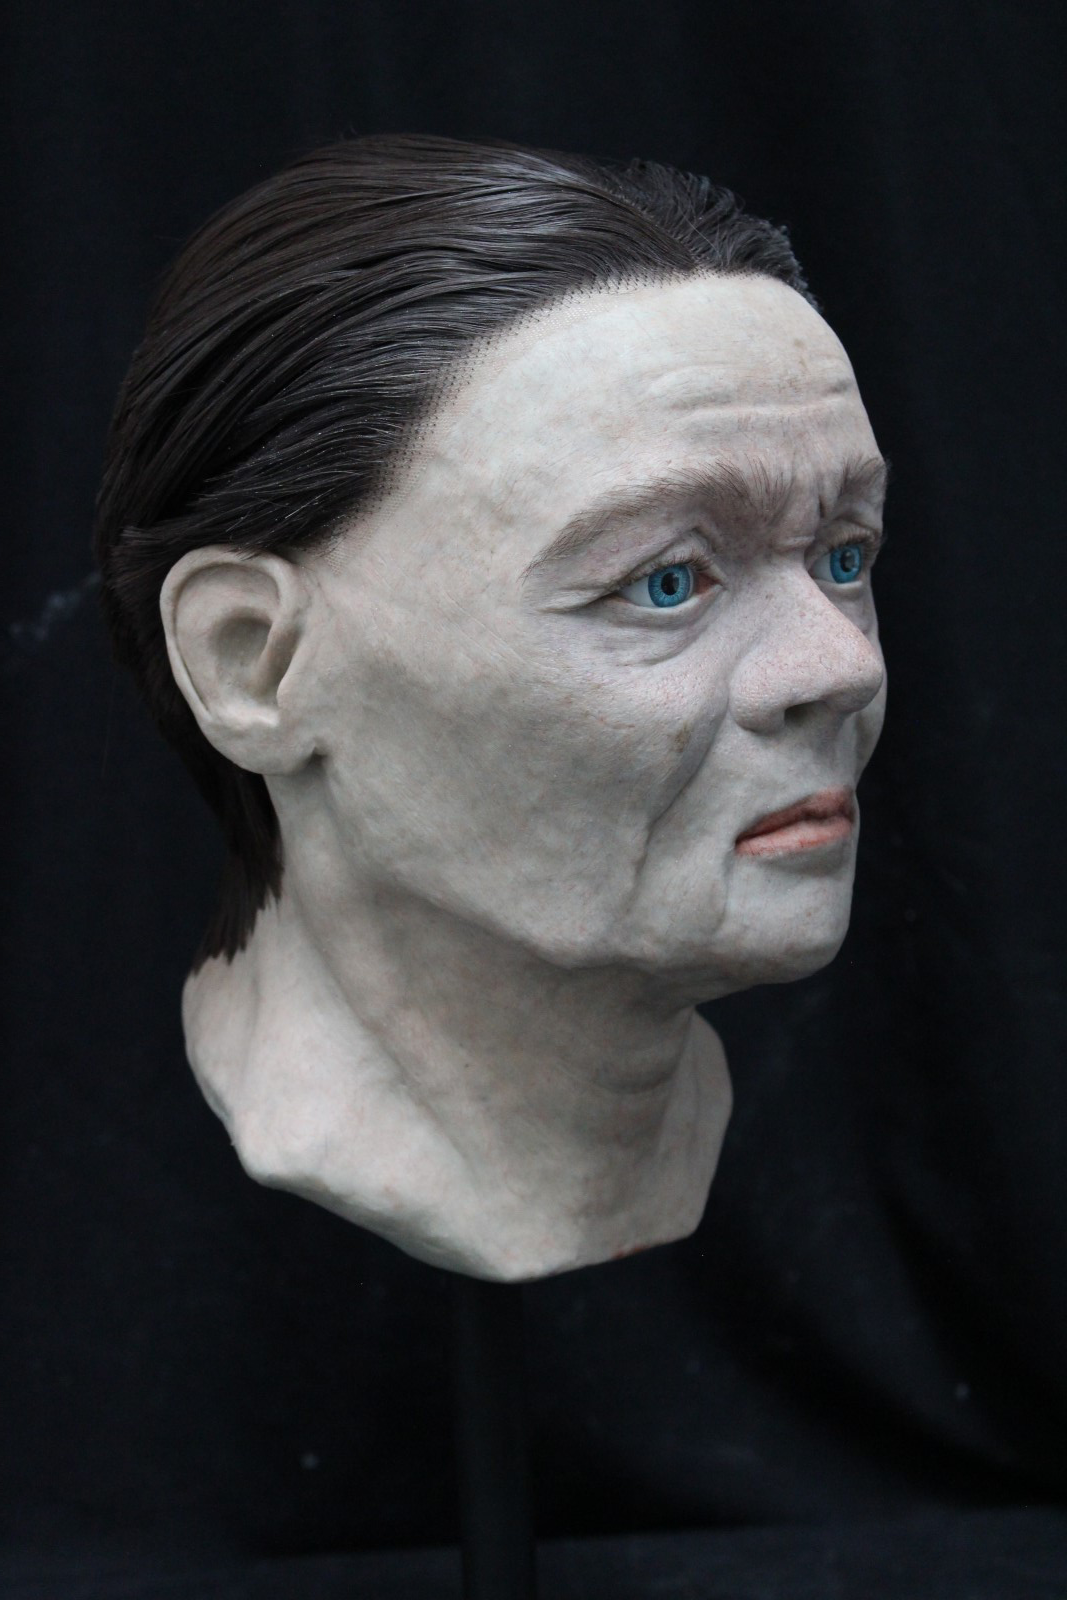 An archaeological facial reconstruction of John Hand, right side profile view